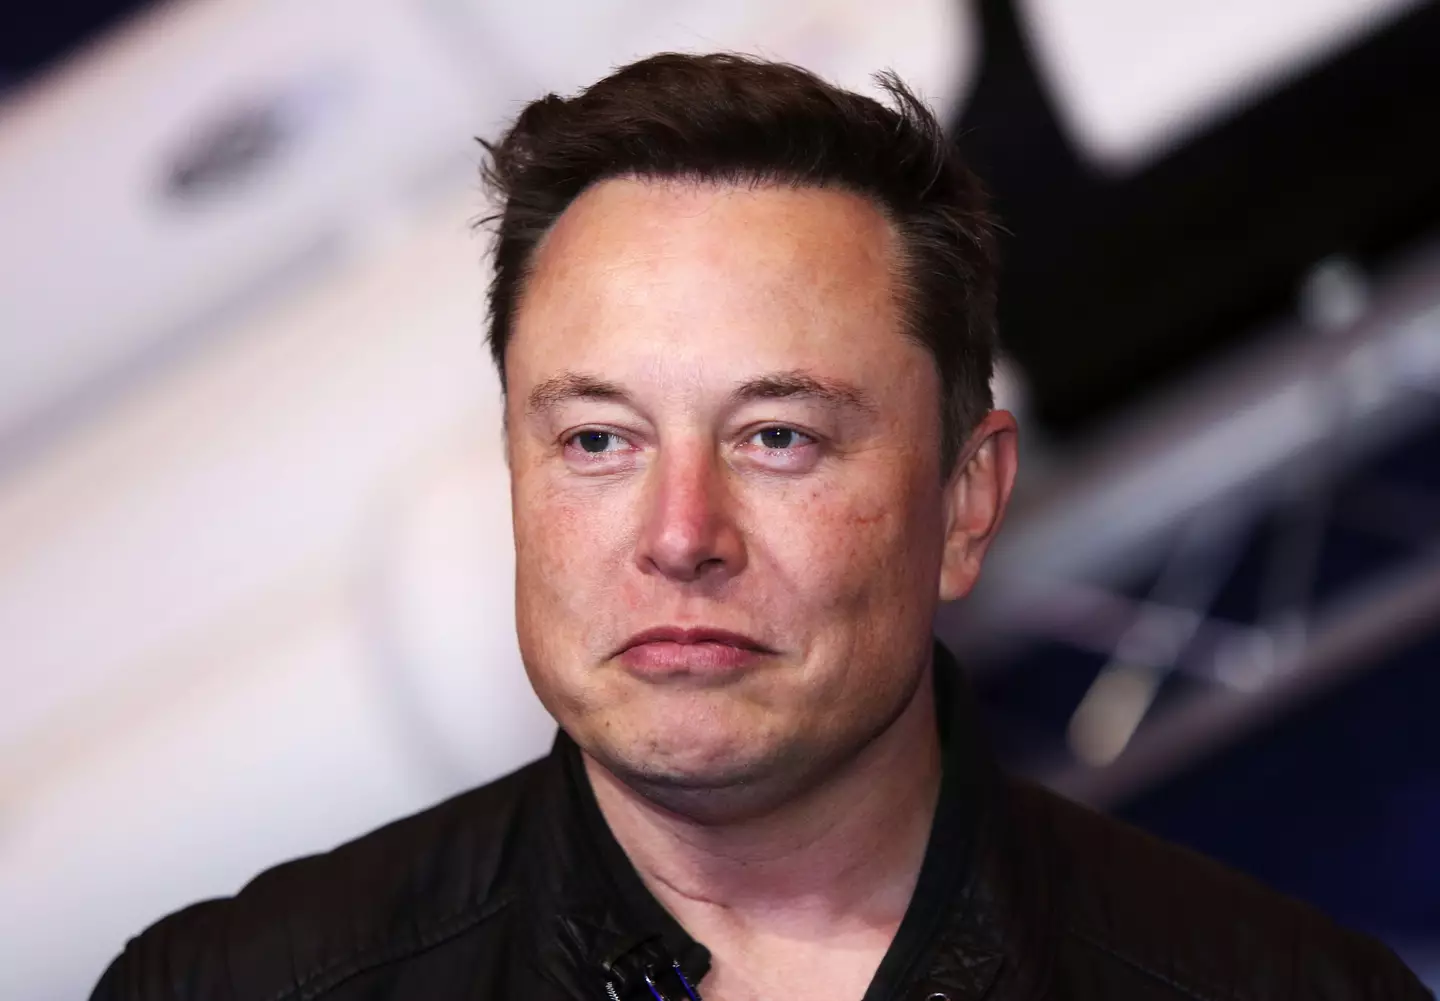 Elon Musk has offered to buy Twitter.